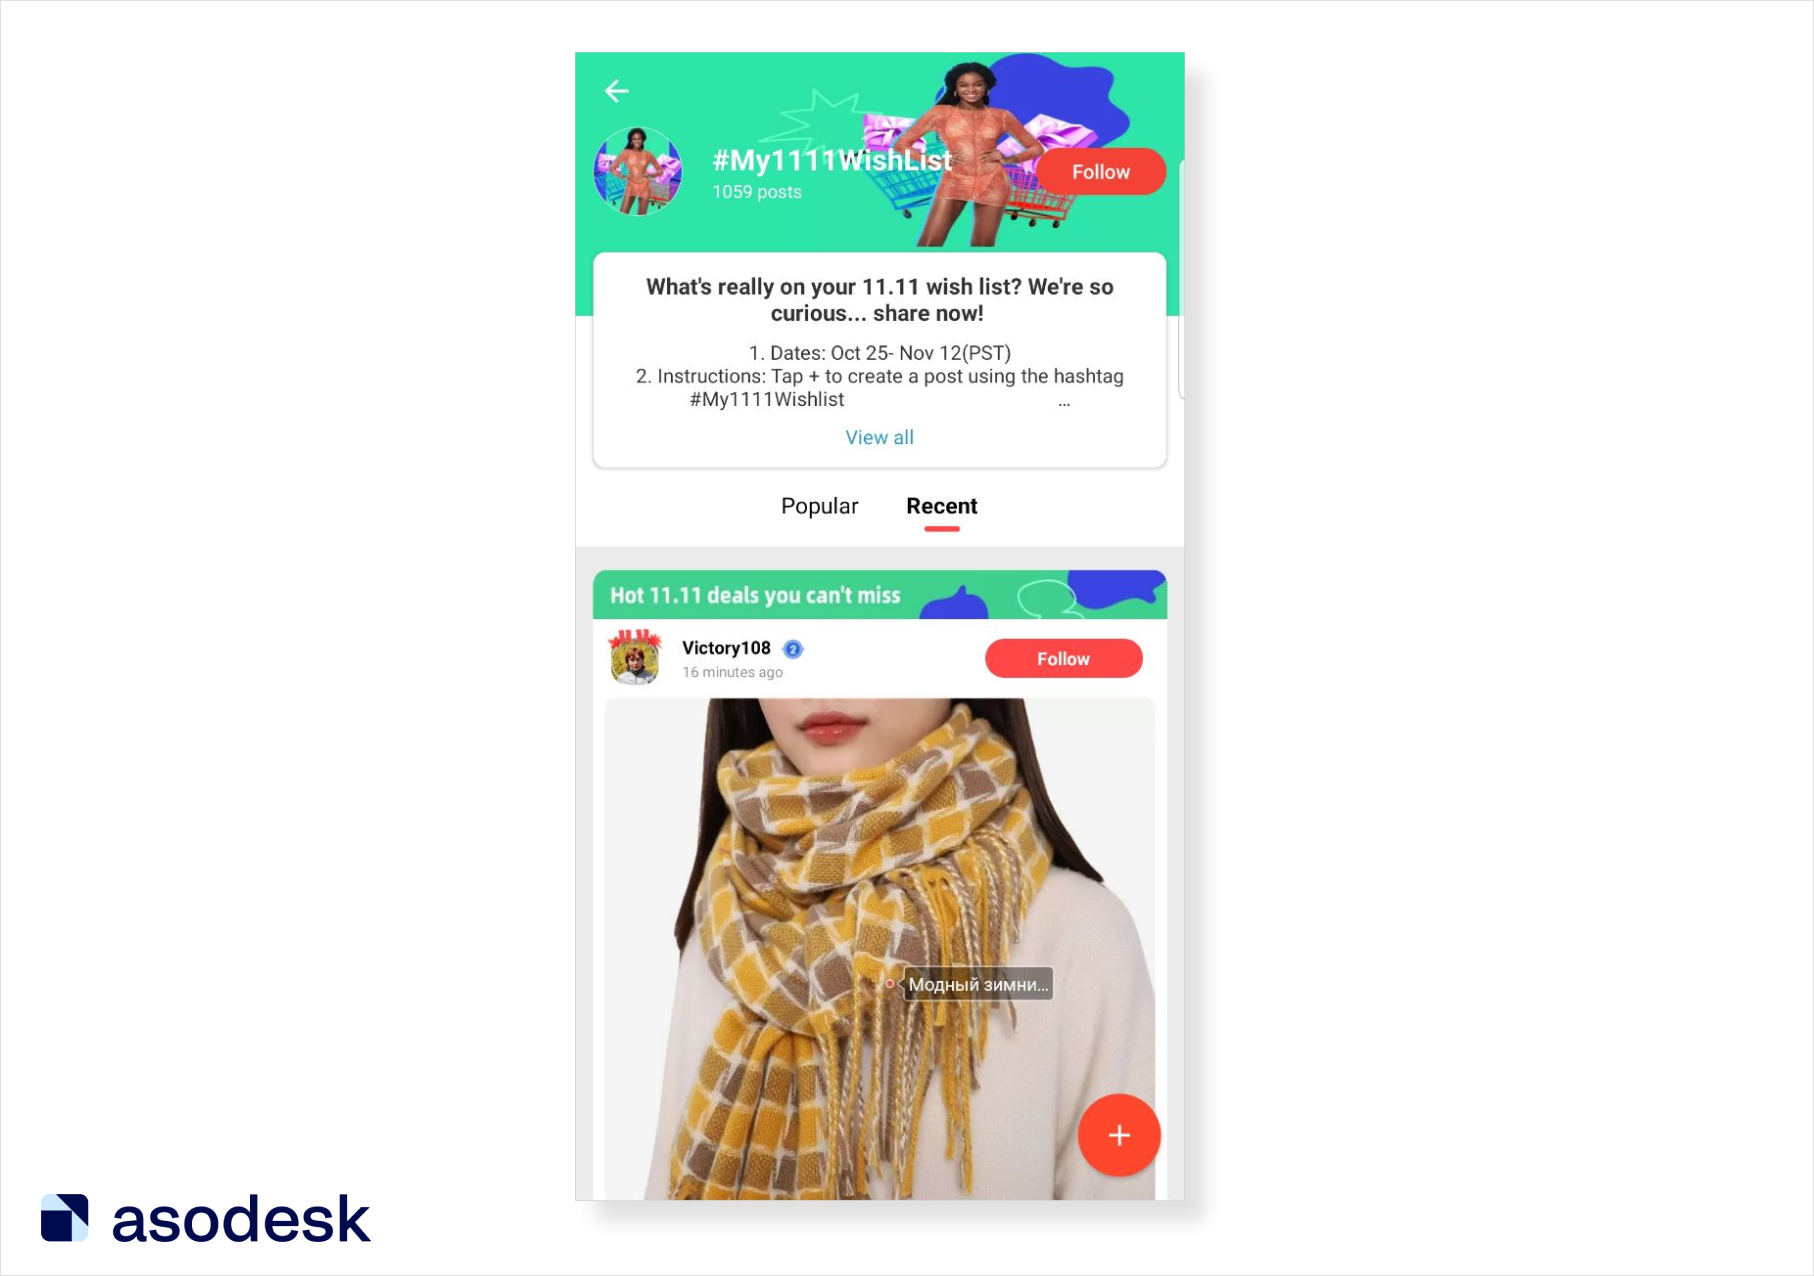 Inside the AliExpress app, there is a "wishlist" where users can share the items they want to buy